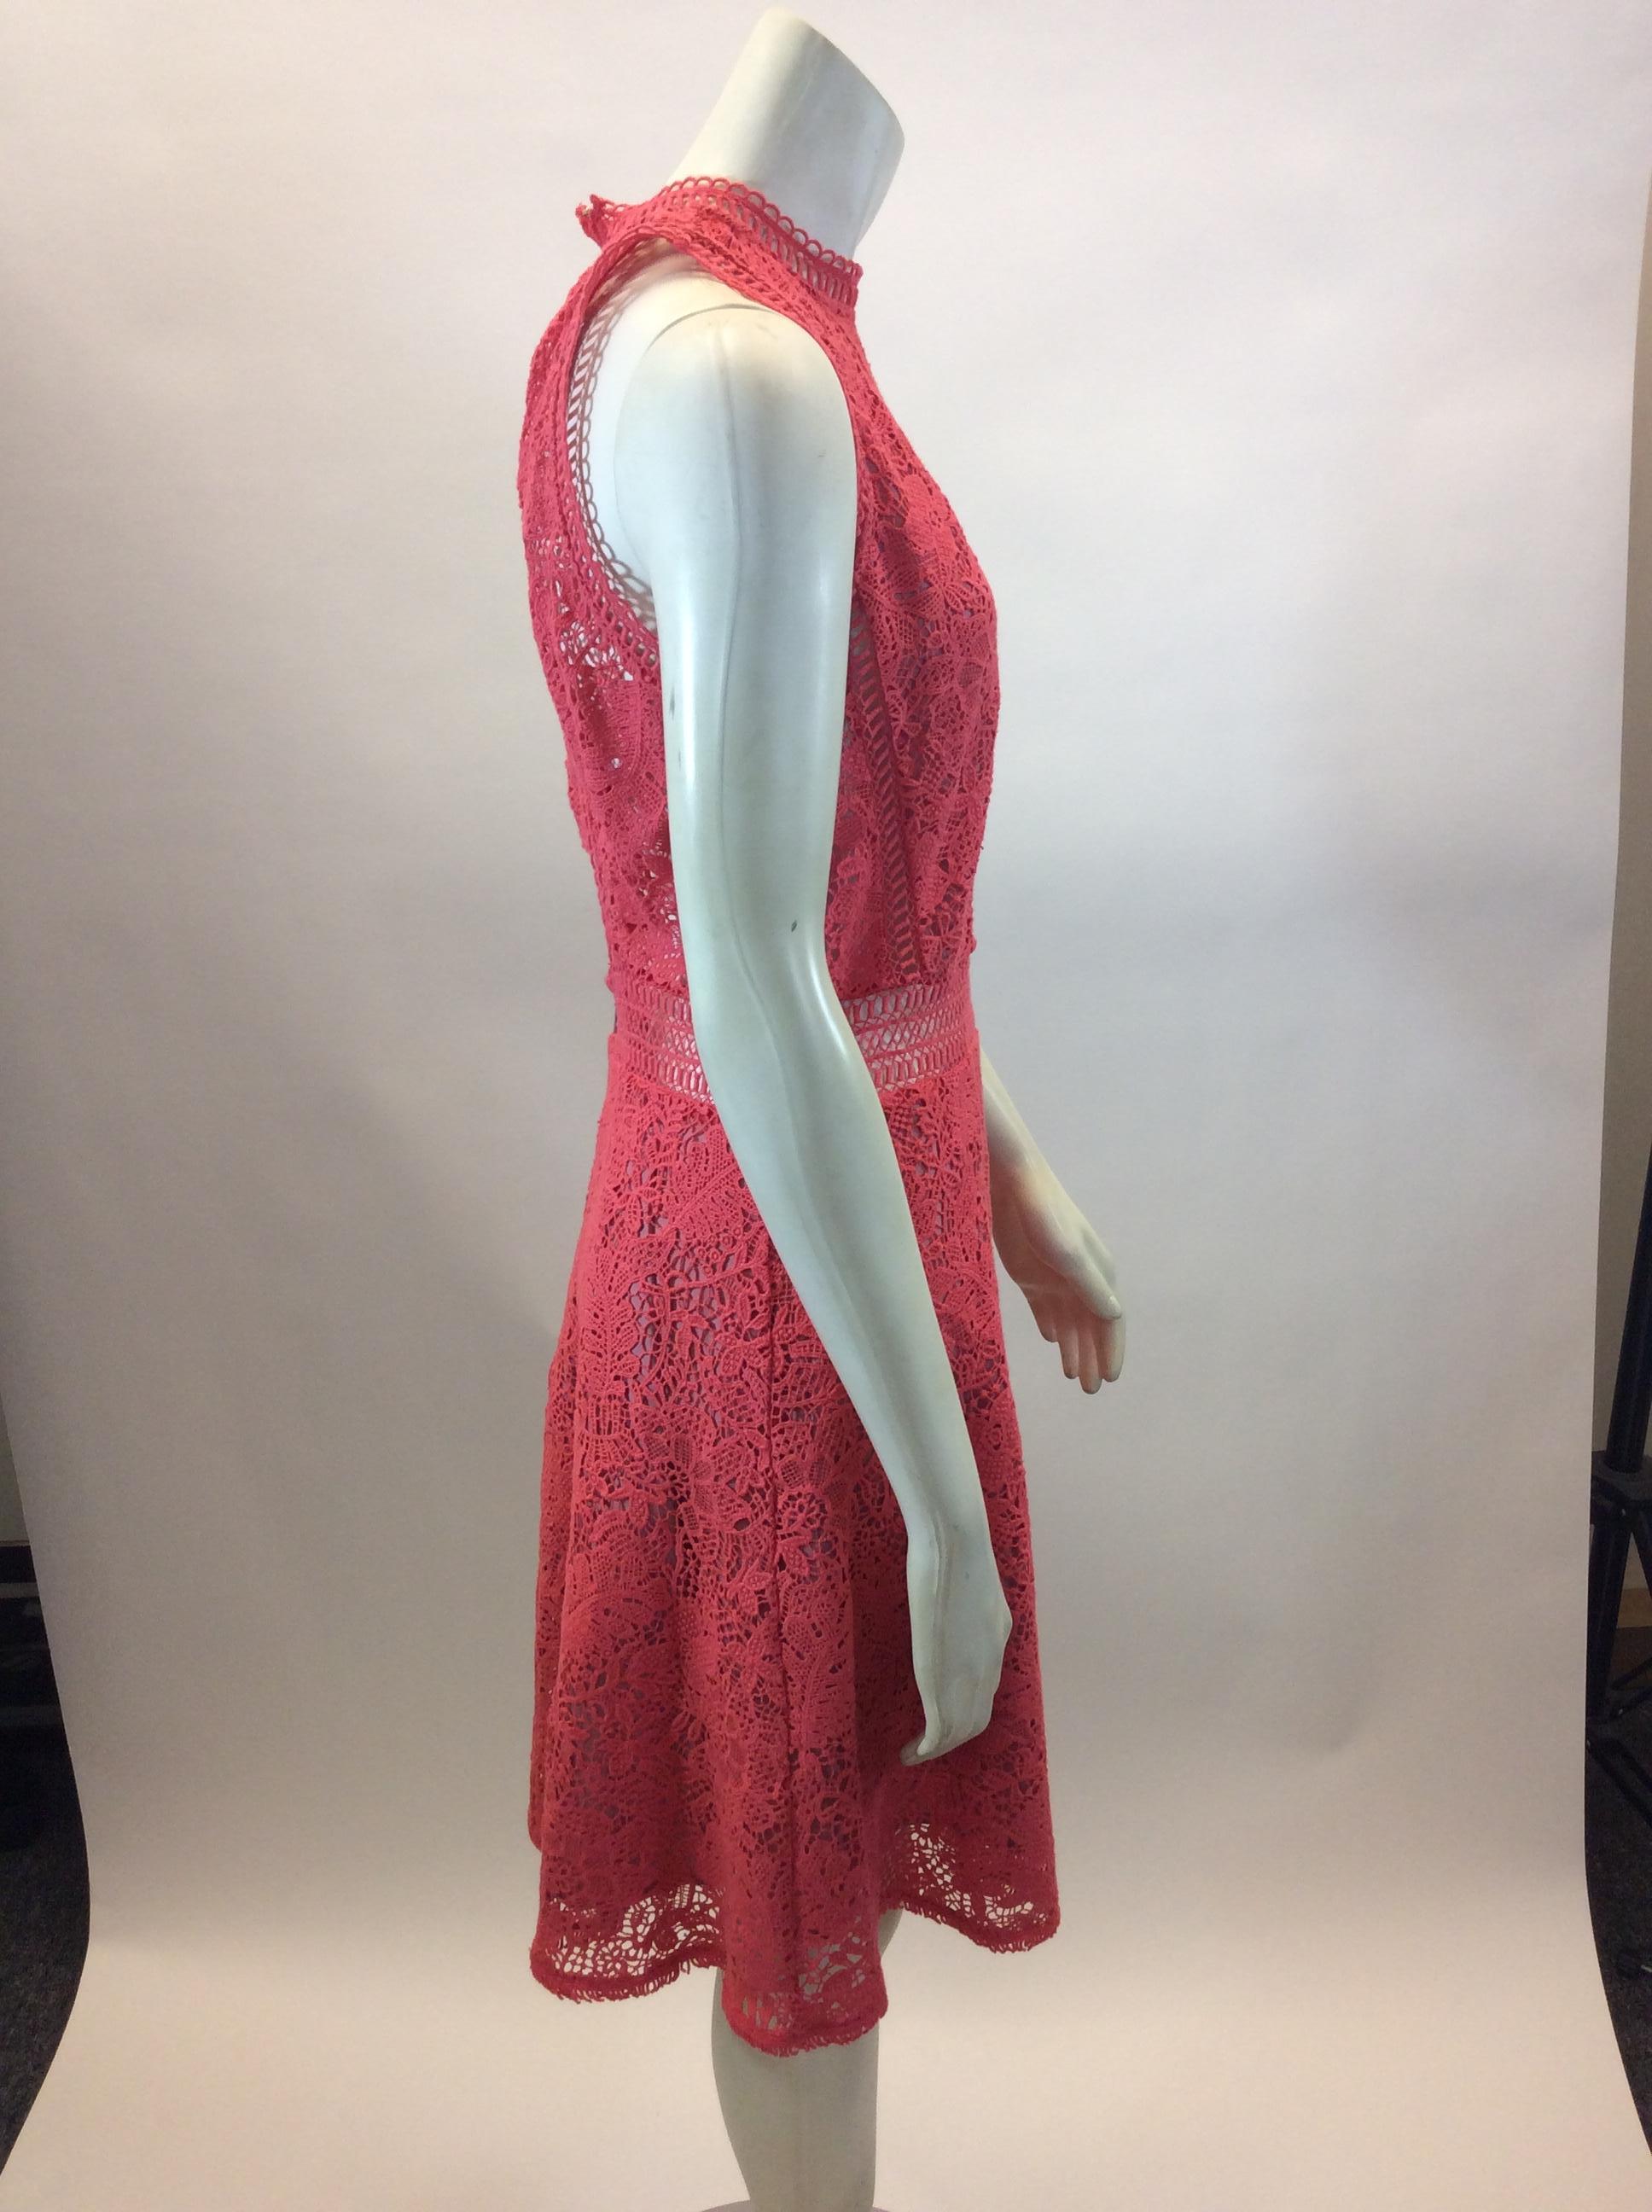 Rebecca Taylor Coral Lace Dress In Good Condition For Sale In Narberth, PA